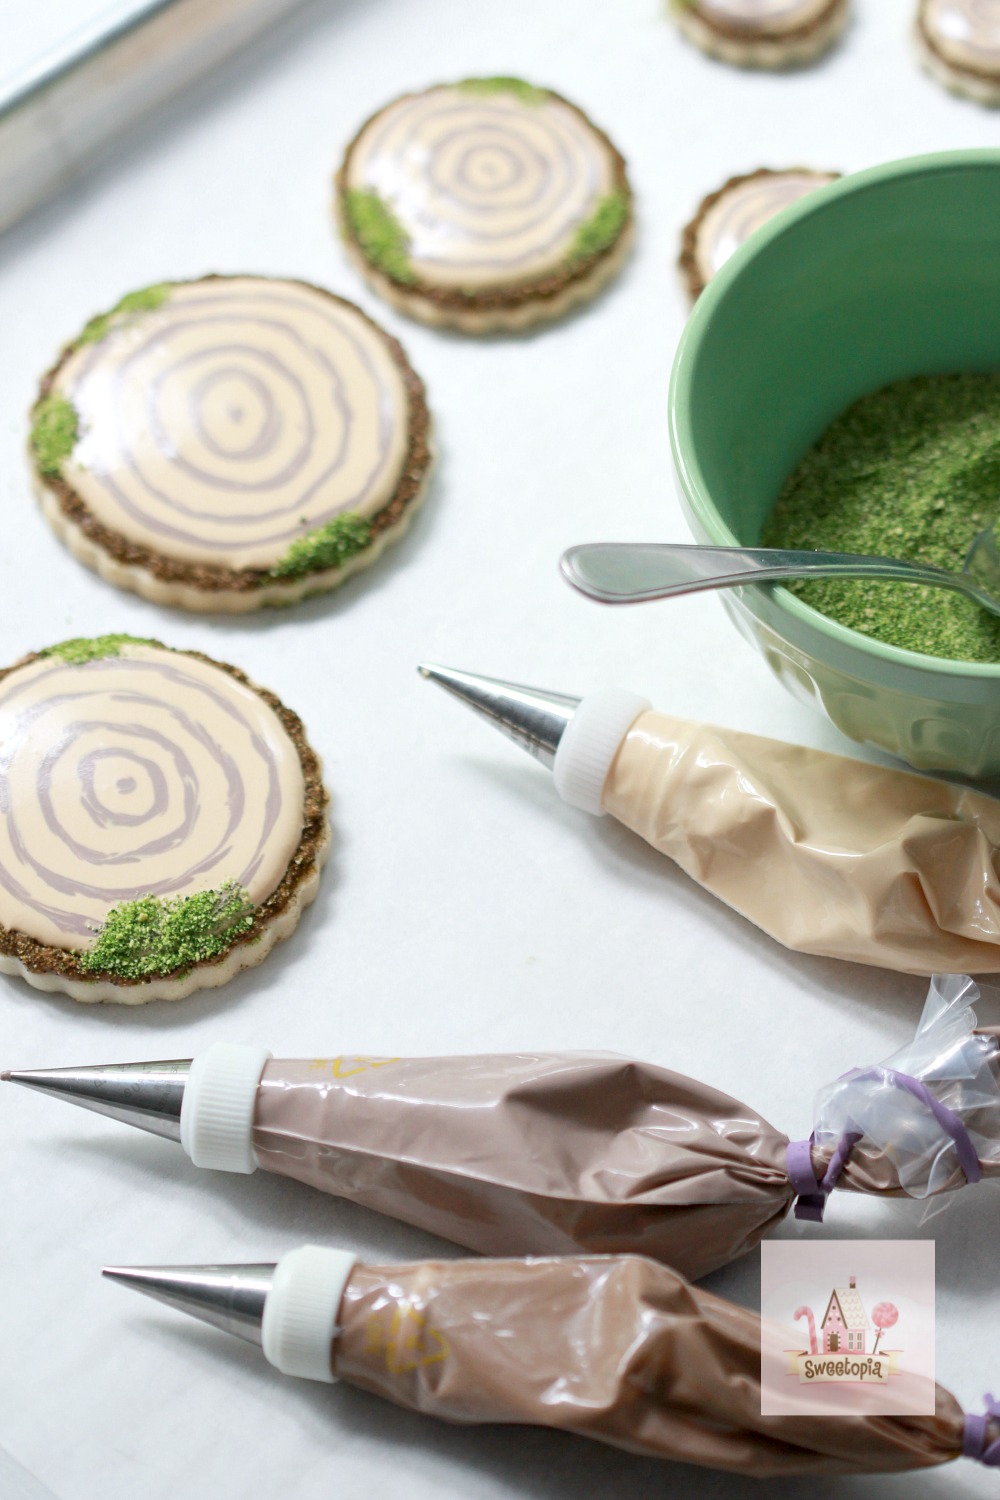 Decorating Cookies with Edible Moss